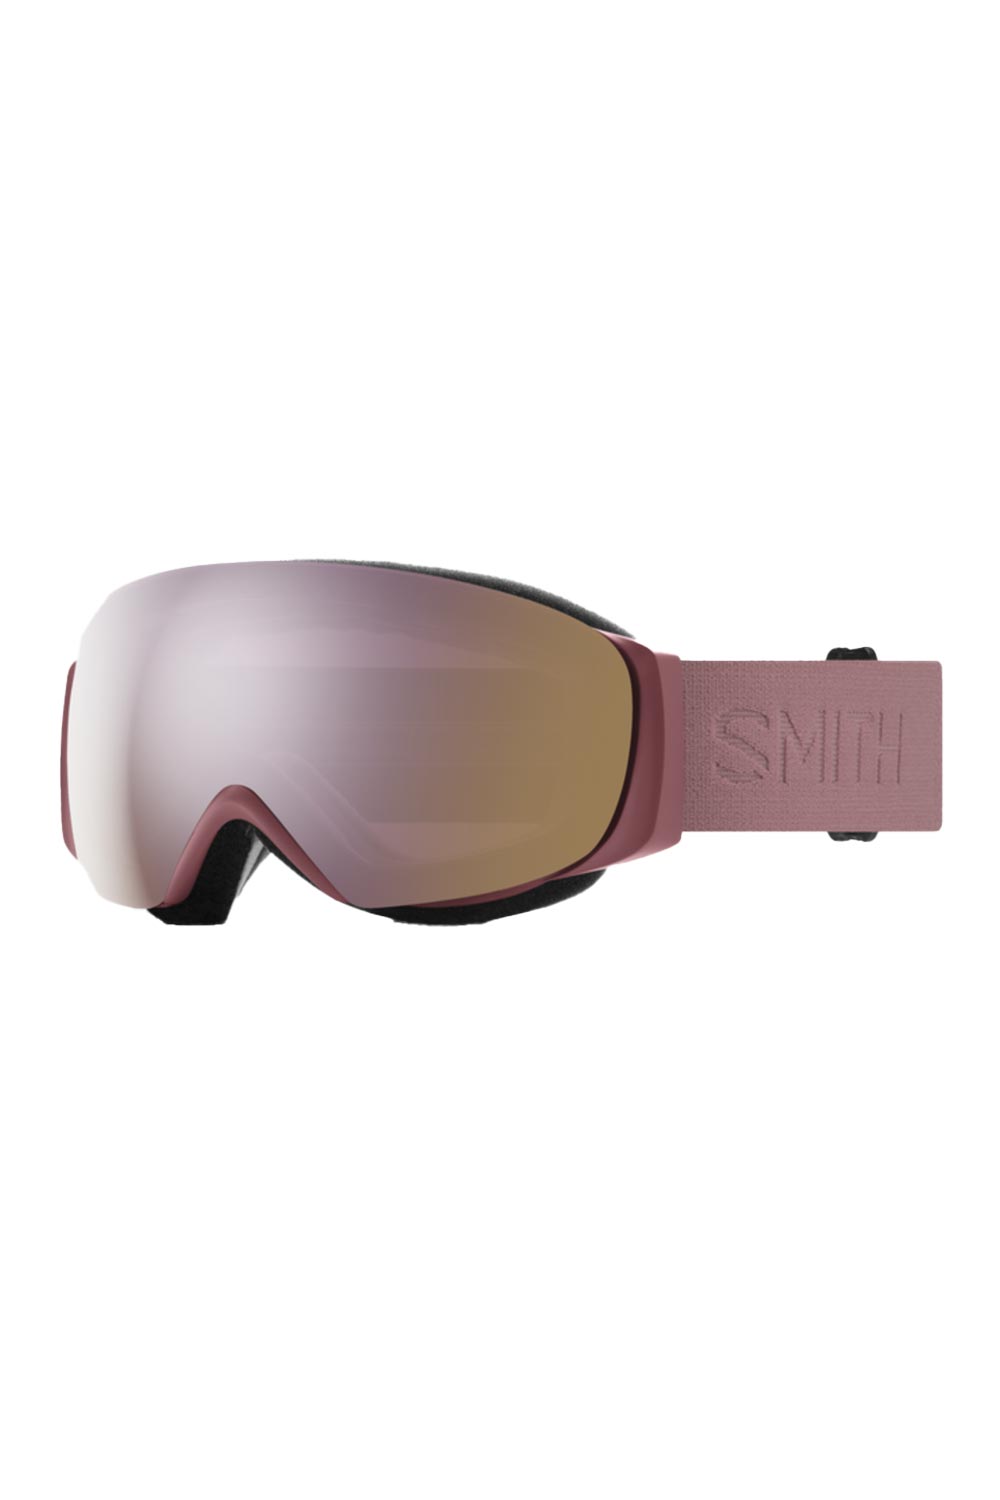 Smith ski goggles, rose strap and rose gold lens